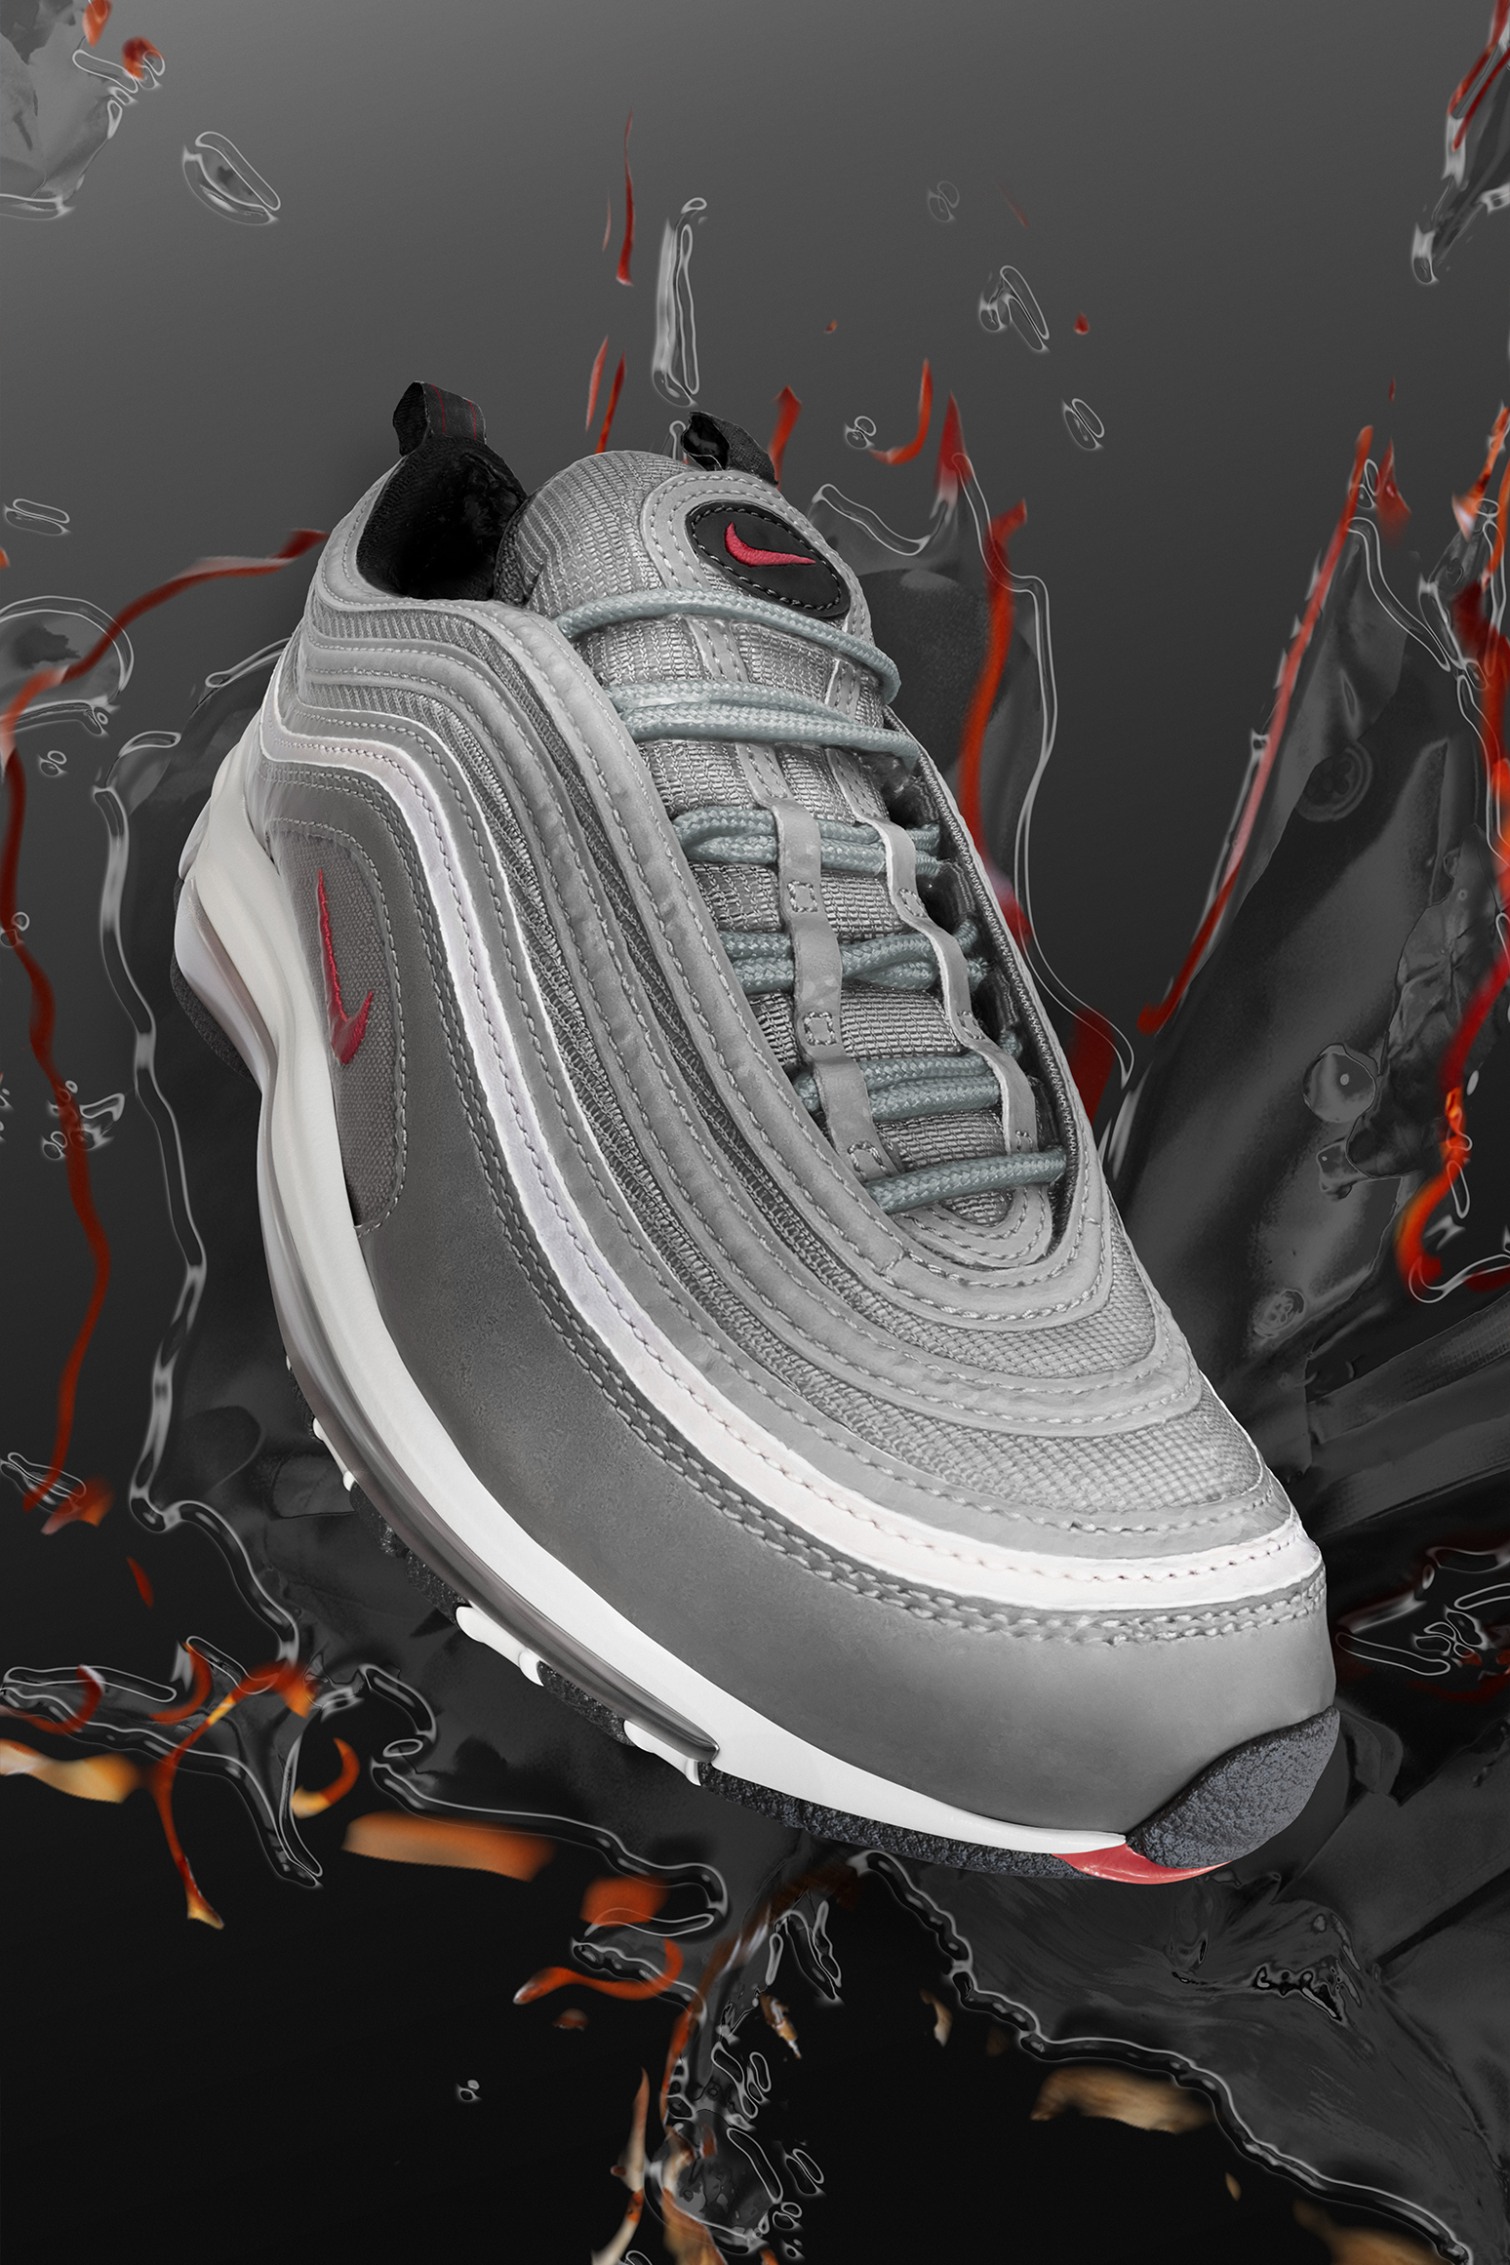 The Air Max 97 'Silver Bullet' makes a comeback for the anniversary of the Air Max 97s.